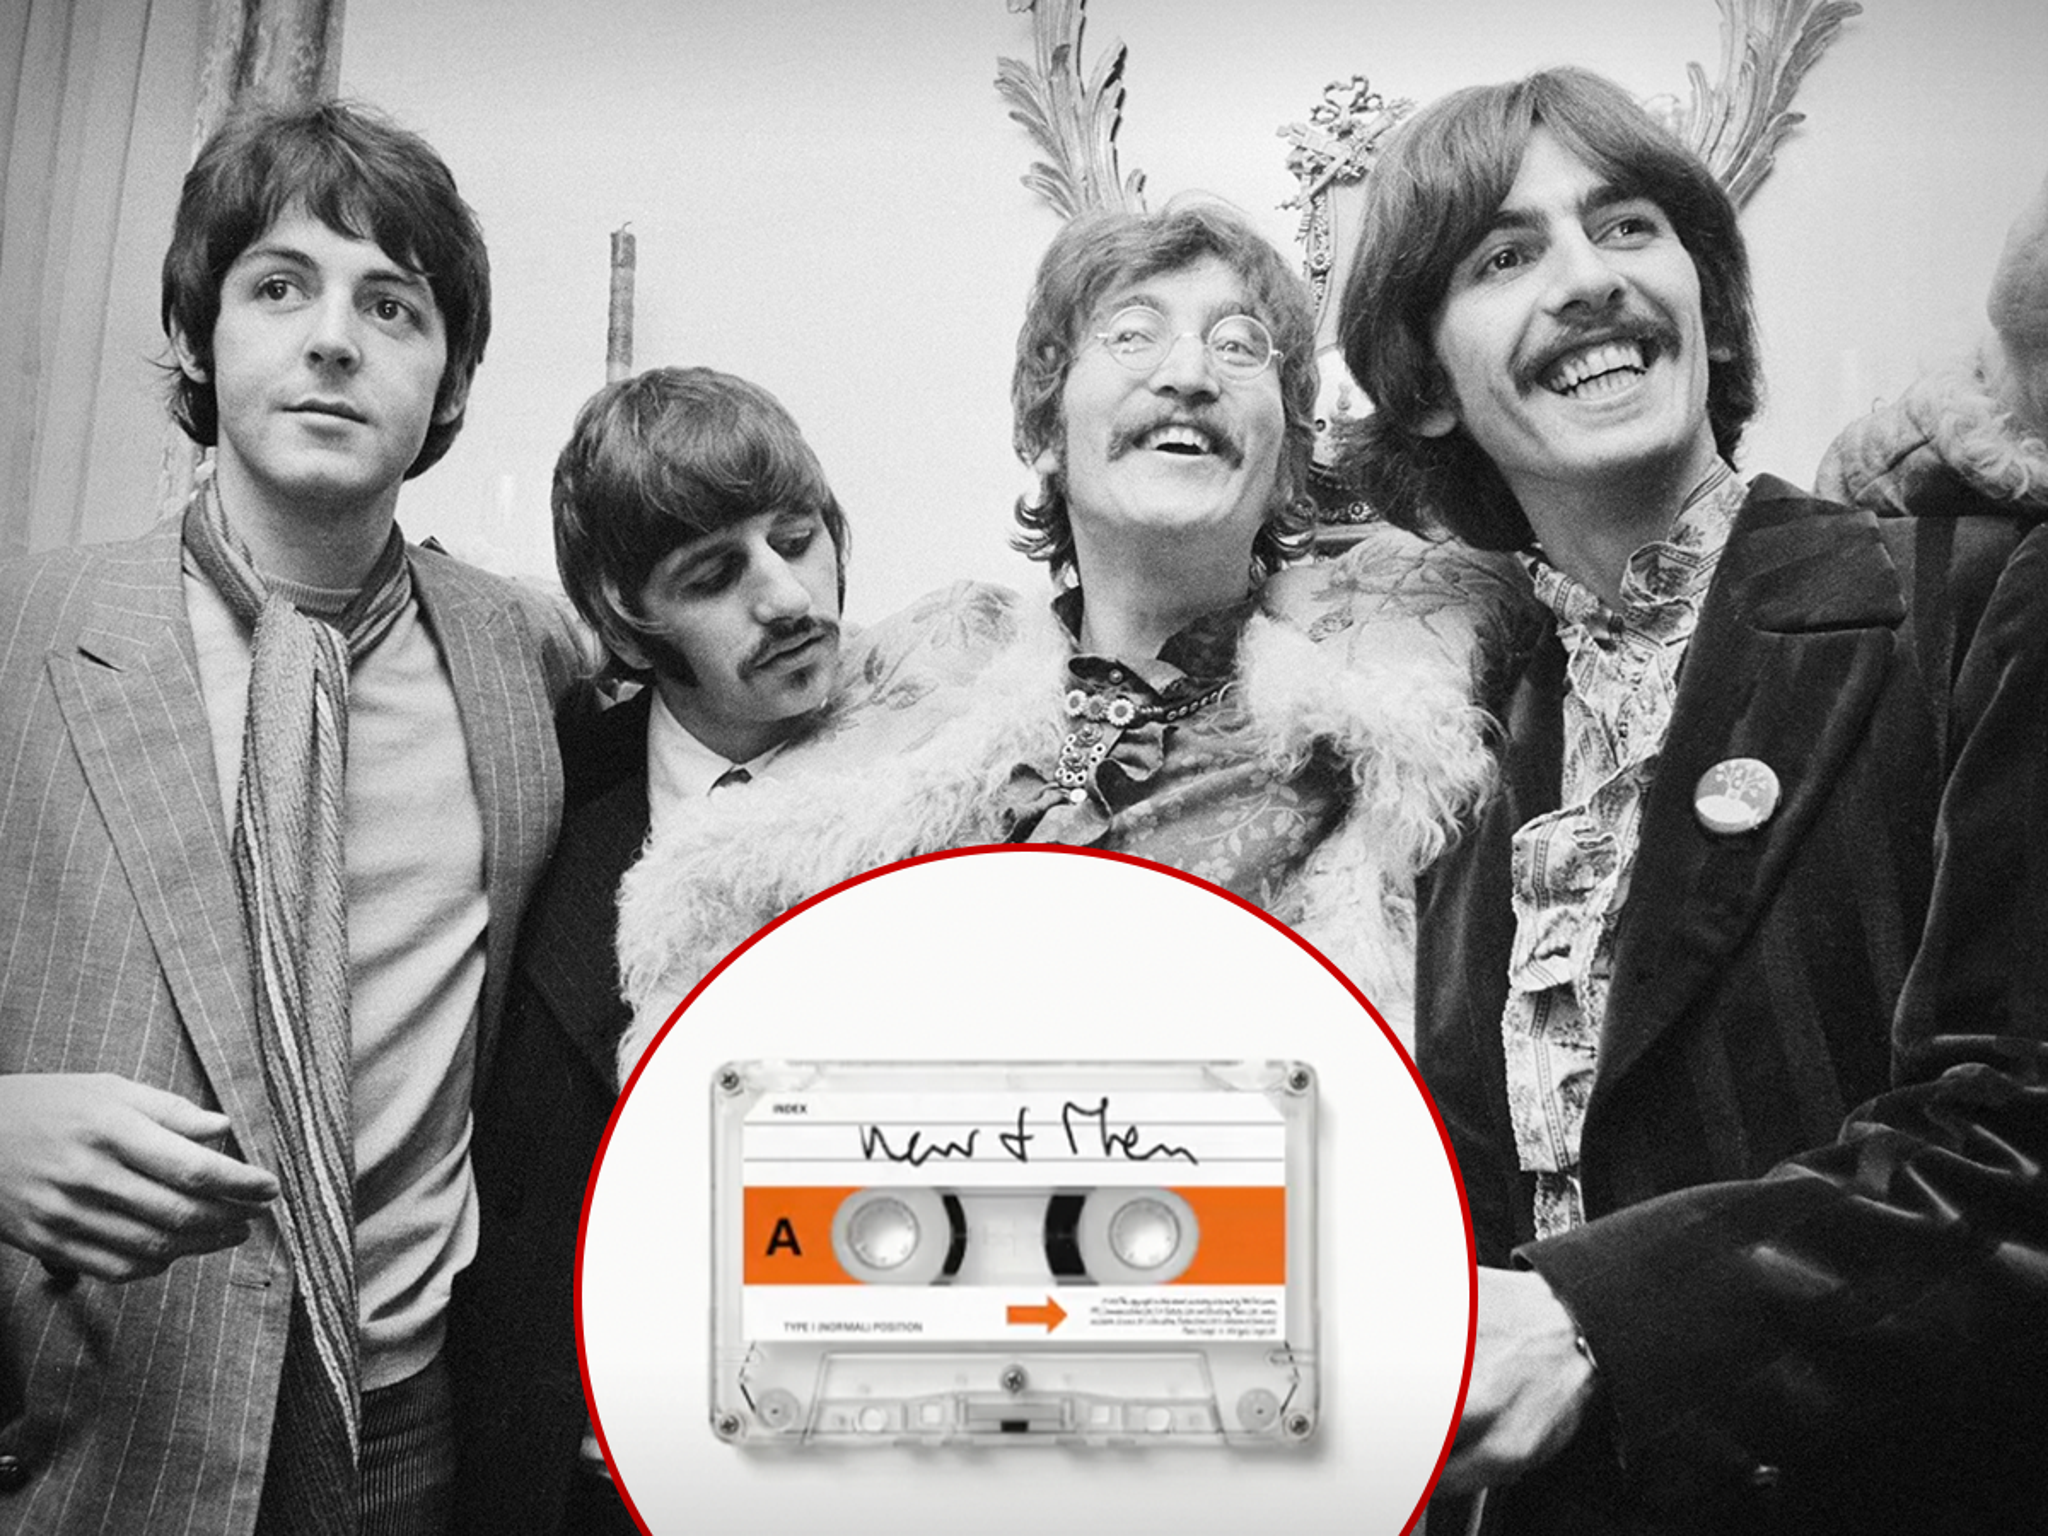 The Beatles announce their final ever song, 'Now and Then', made